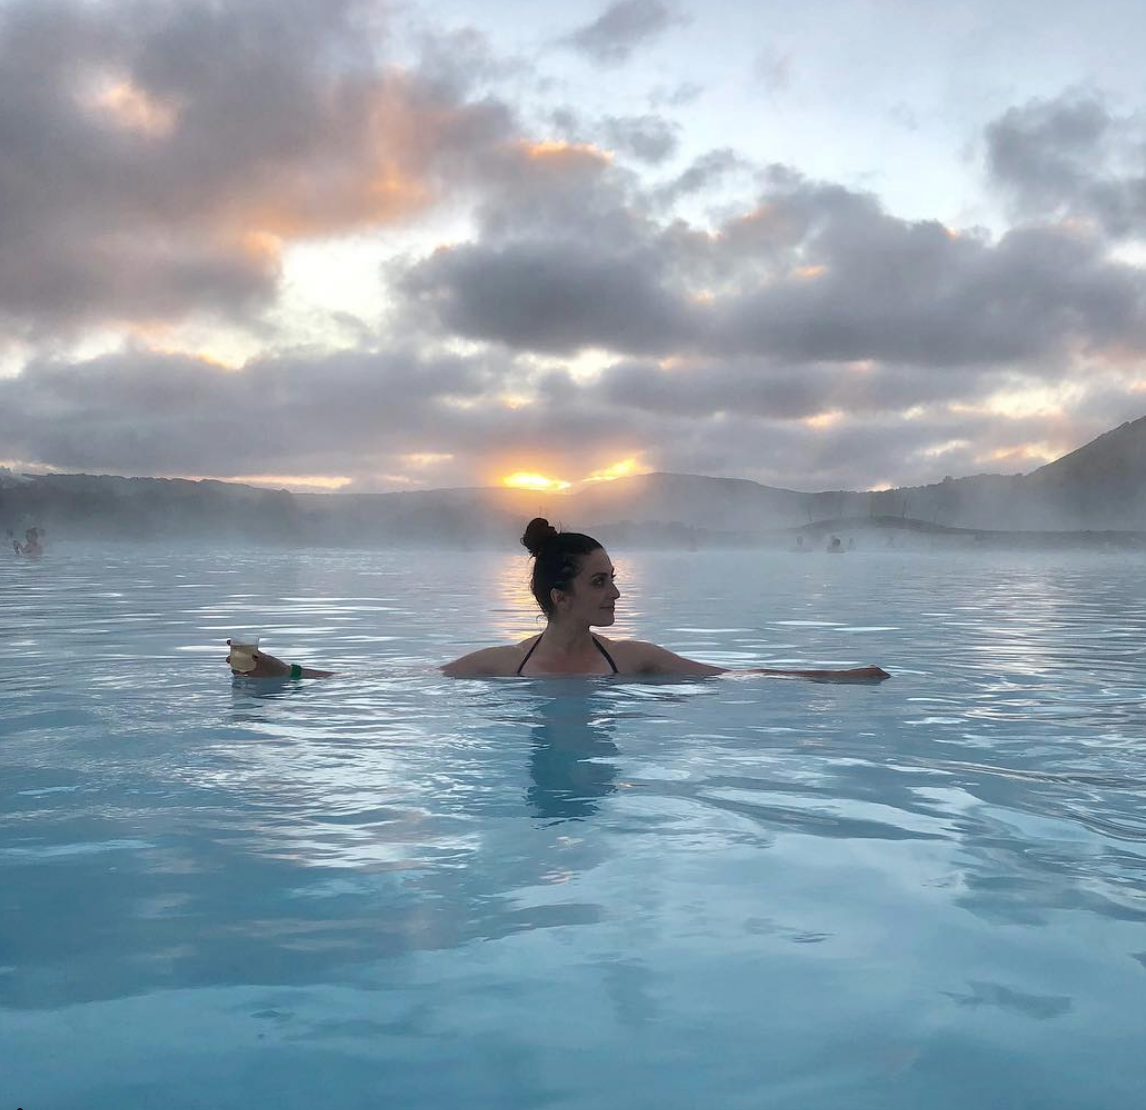 iceland tours, blue lagoon, icelandic horses, waterfalls in iceland, southern iceland, golden circle, thermal springs in iceland, geysir in iceland